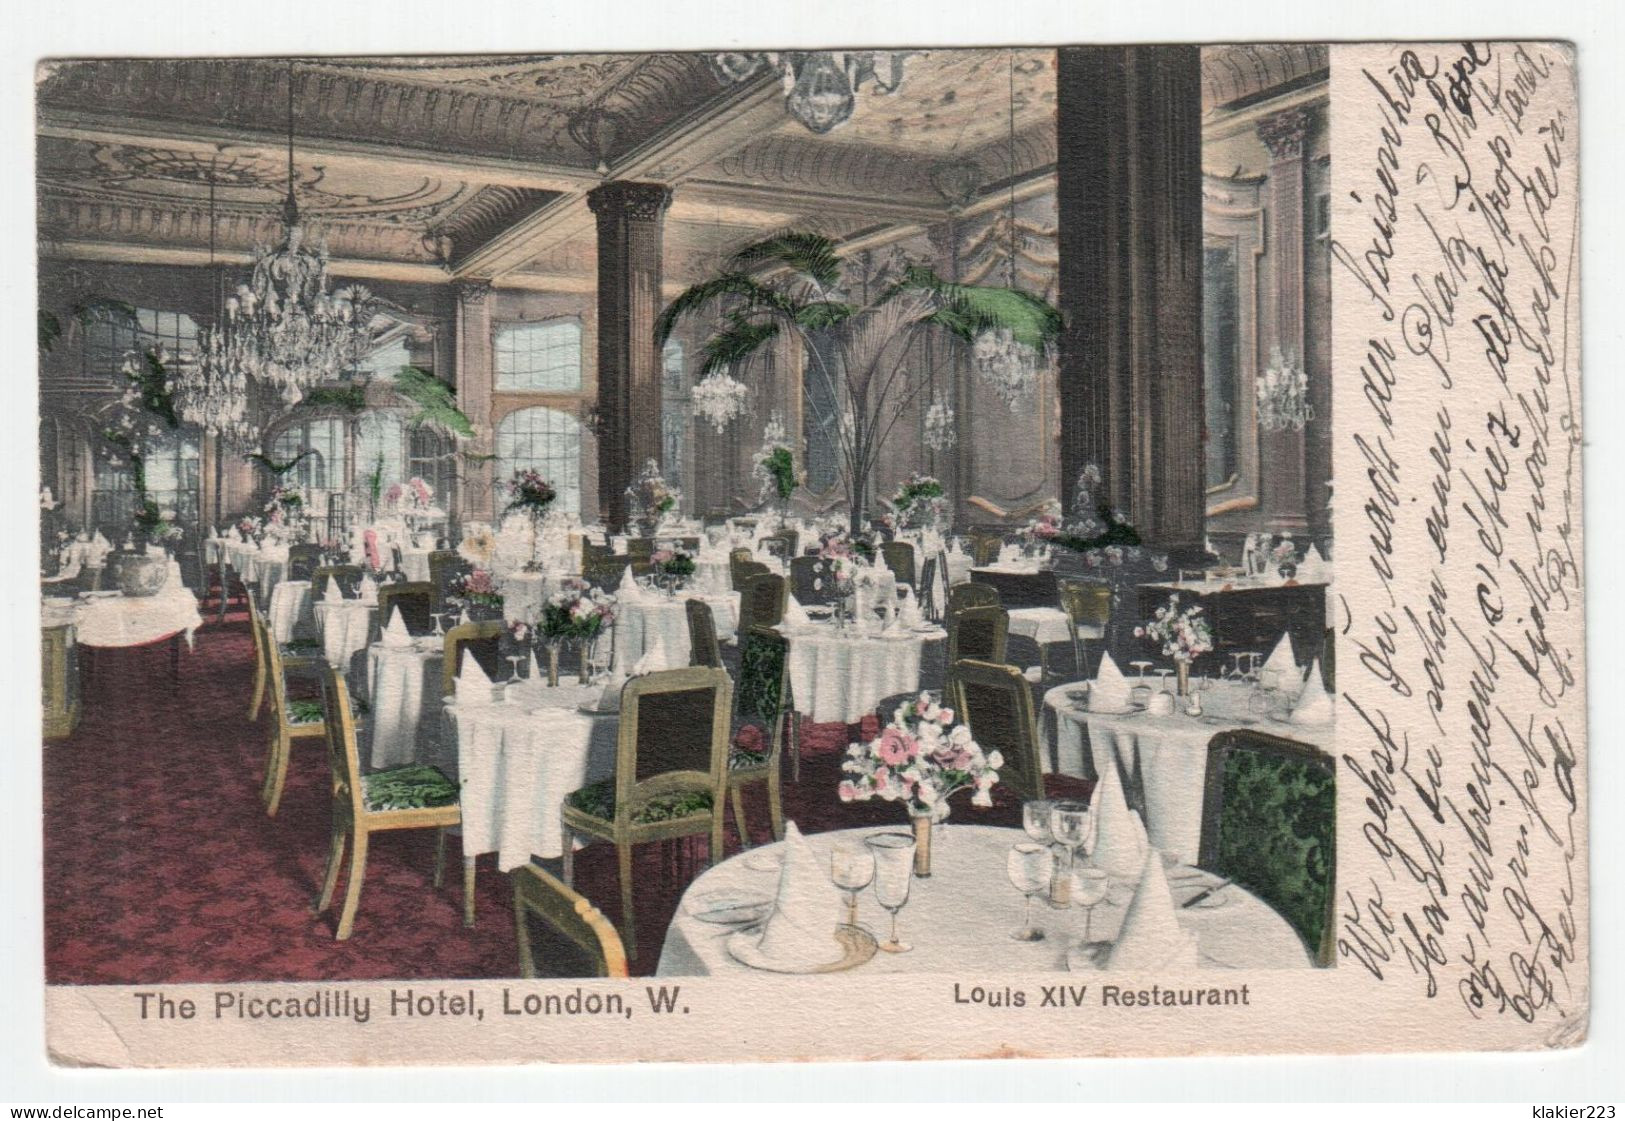 The Piccadilly Hotel, London, W. Louis XIV Restaurant - Piccadilly Circus